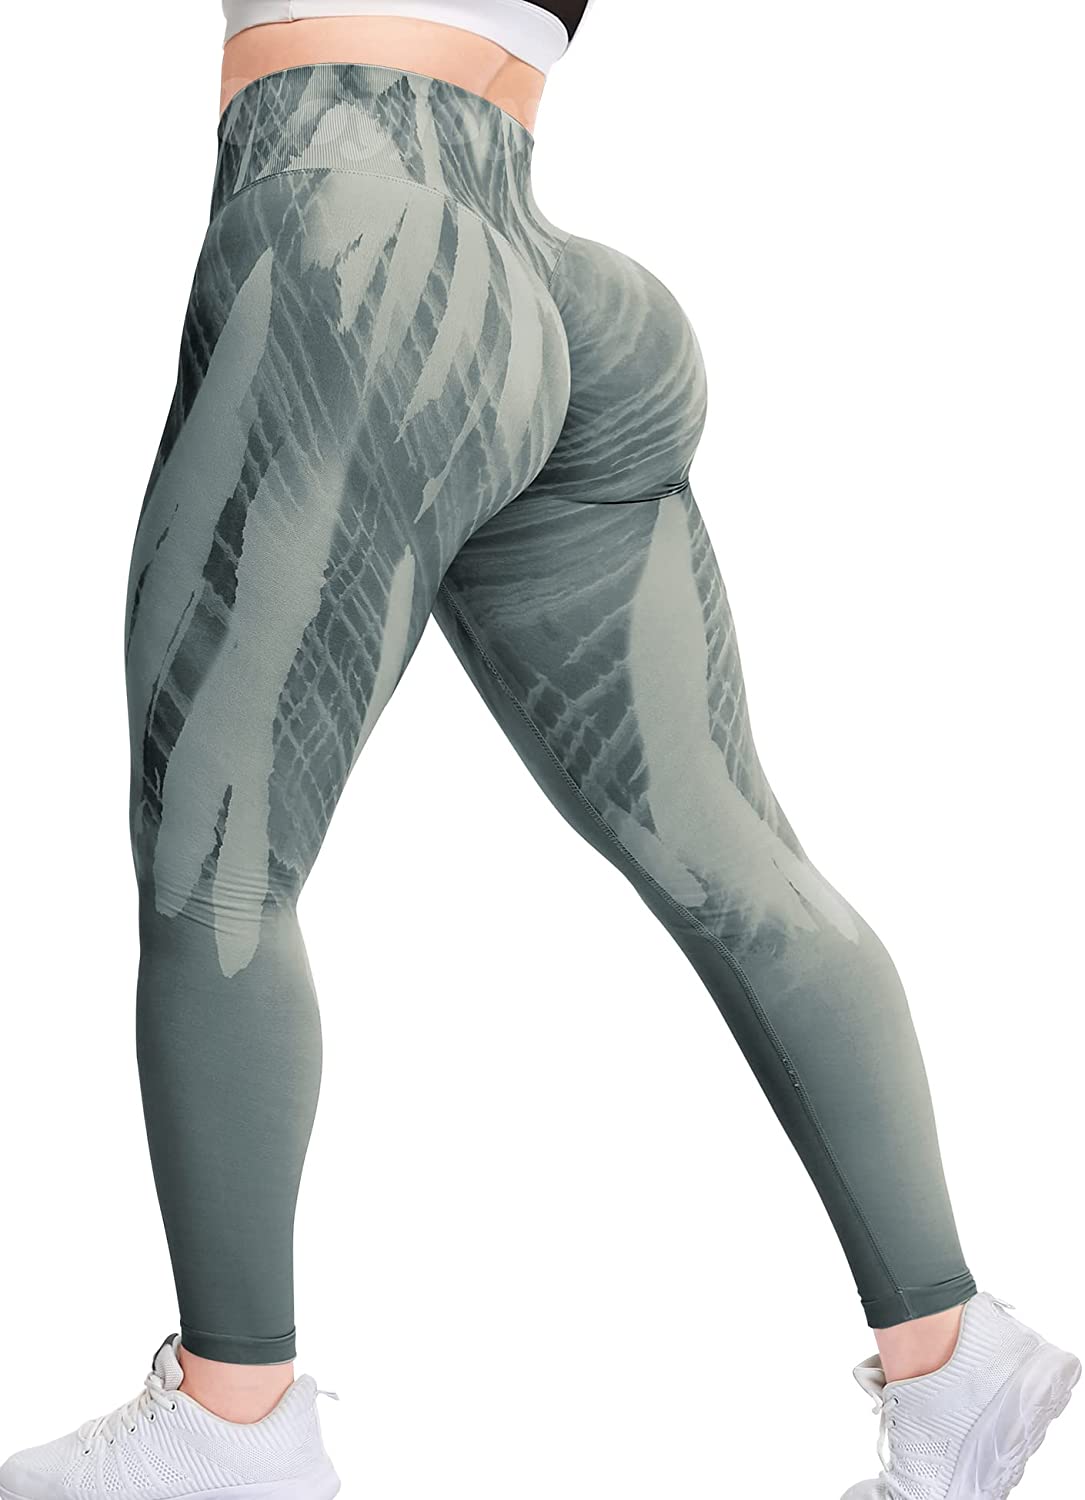 VOYJOY Women Scrunch Butt Lifting Seamless Yoga Leggings High Waist Pants  Tummy Control Vital Runched Booty Compression Tight, #0 Contour White Grey,  Small : Buy Online at Best Price in KSA 